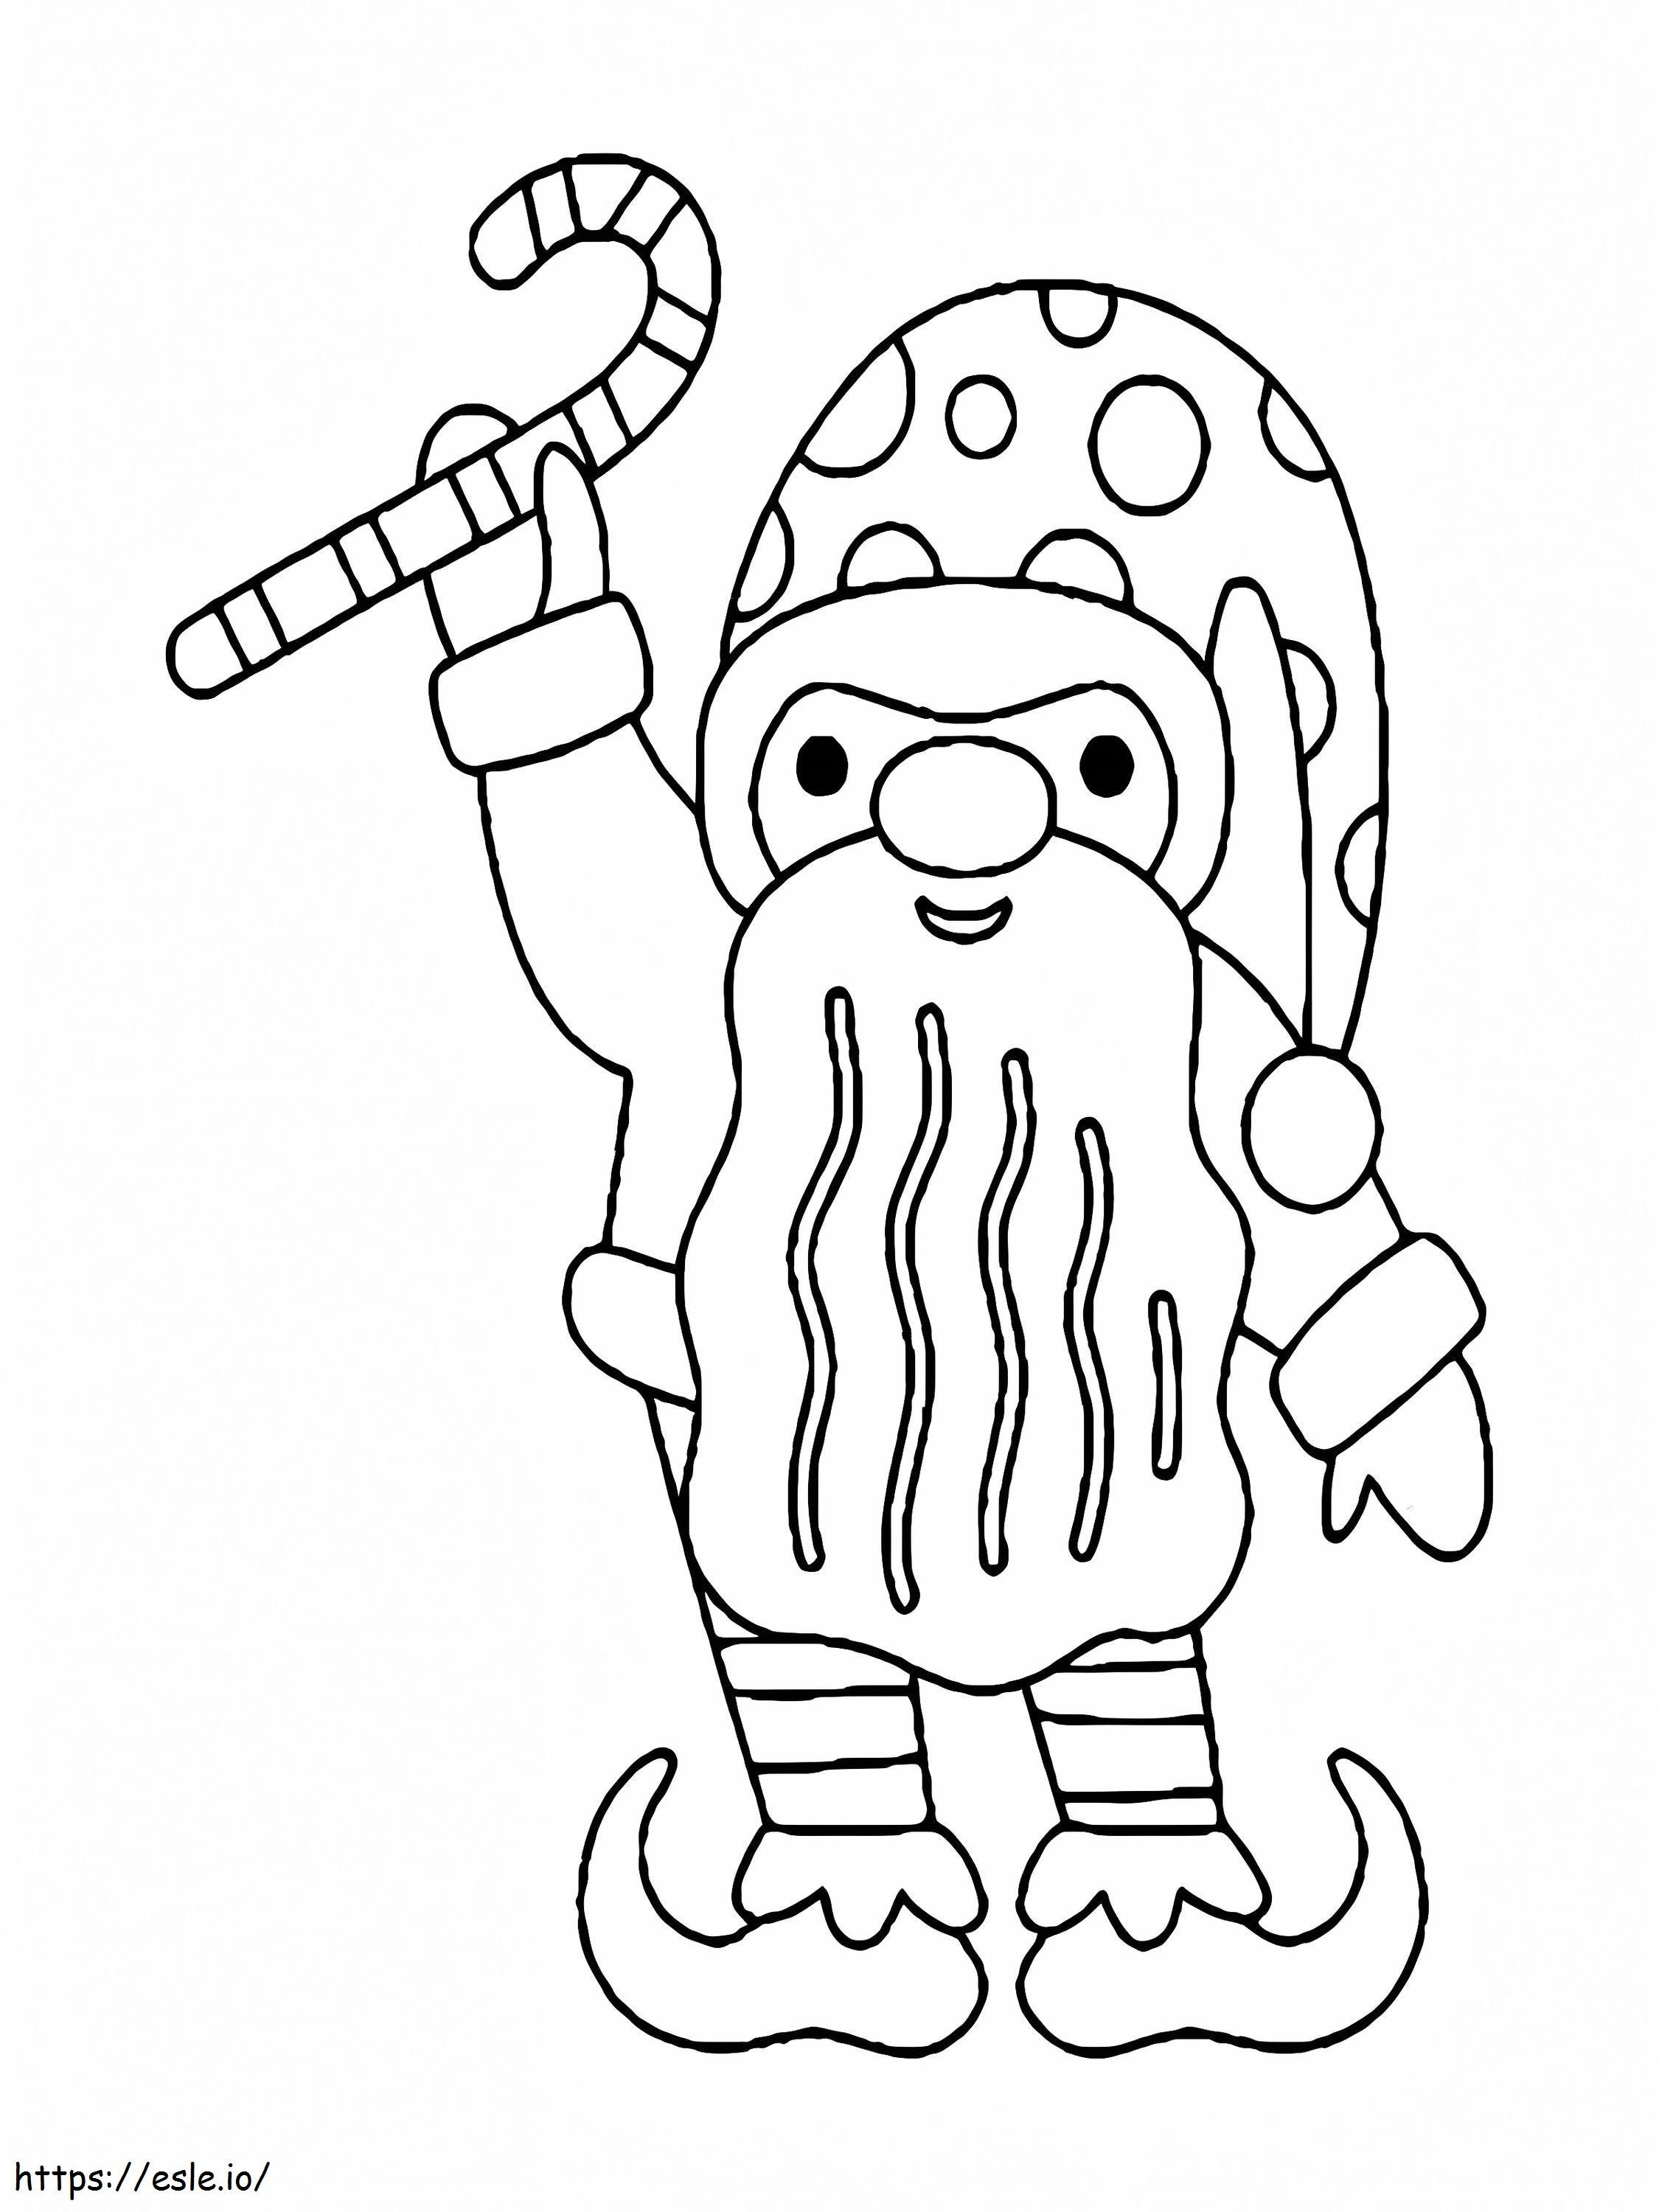 Christmas Gnome 2 coloring page